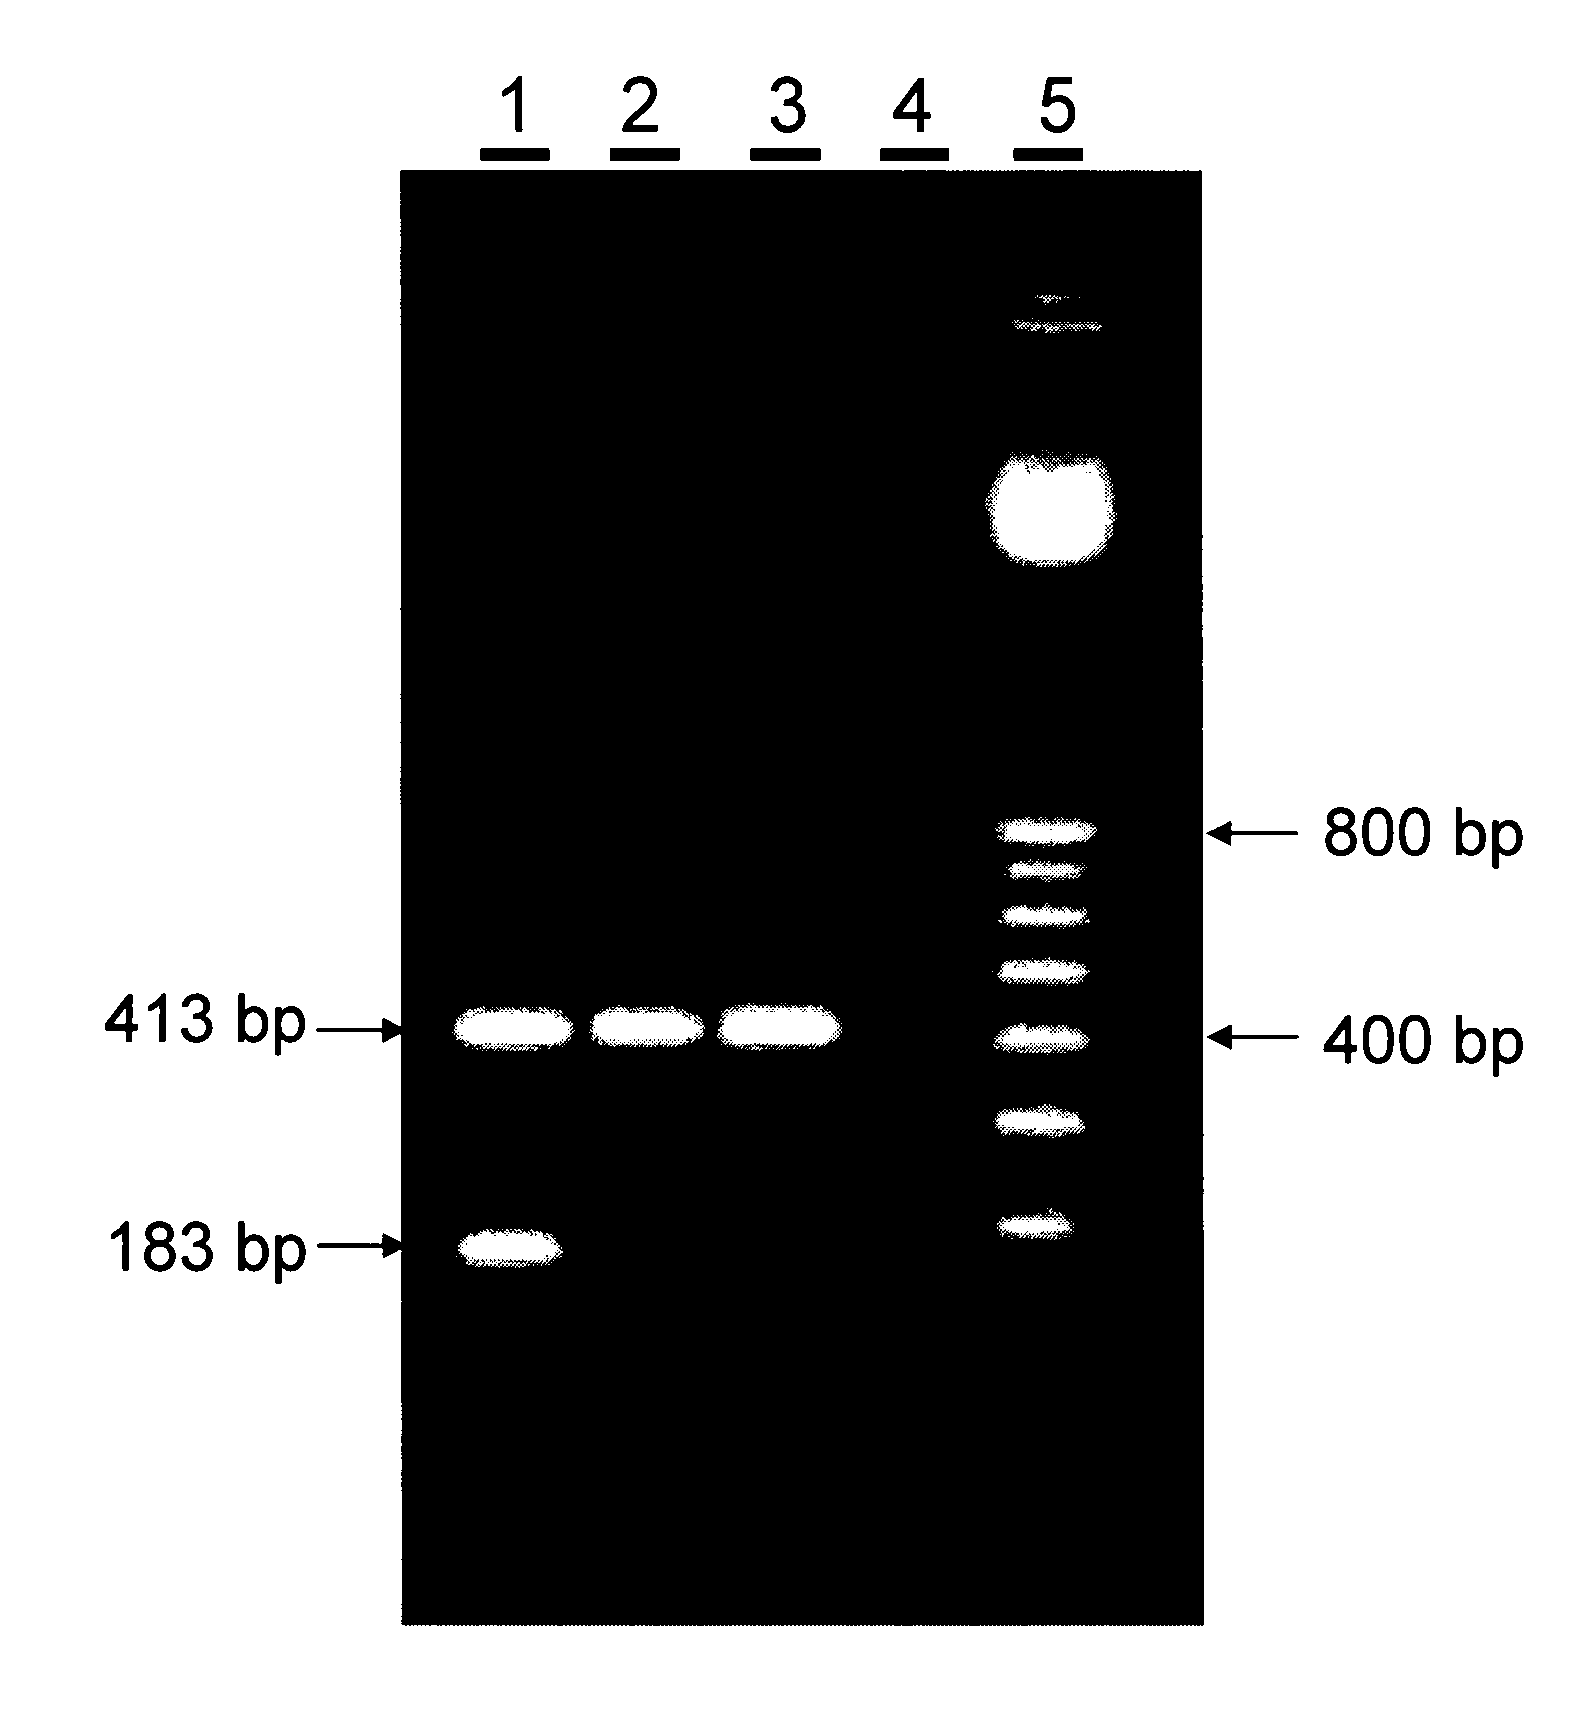 Elite Event A2407-12 and Methods and Kits for Identifying Such Event in Biological Samples